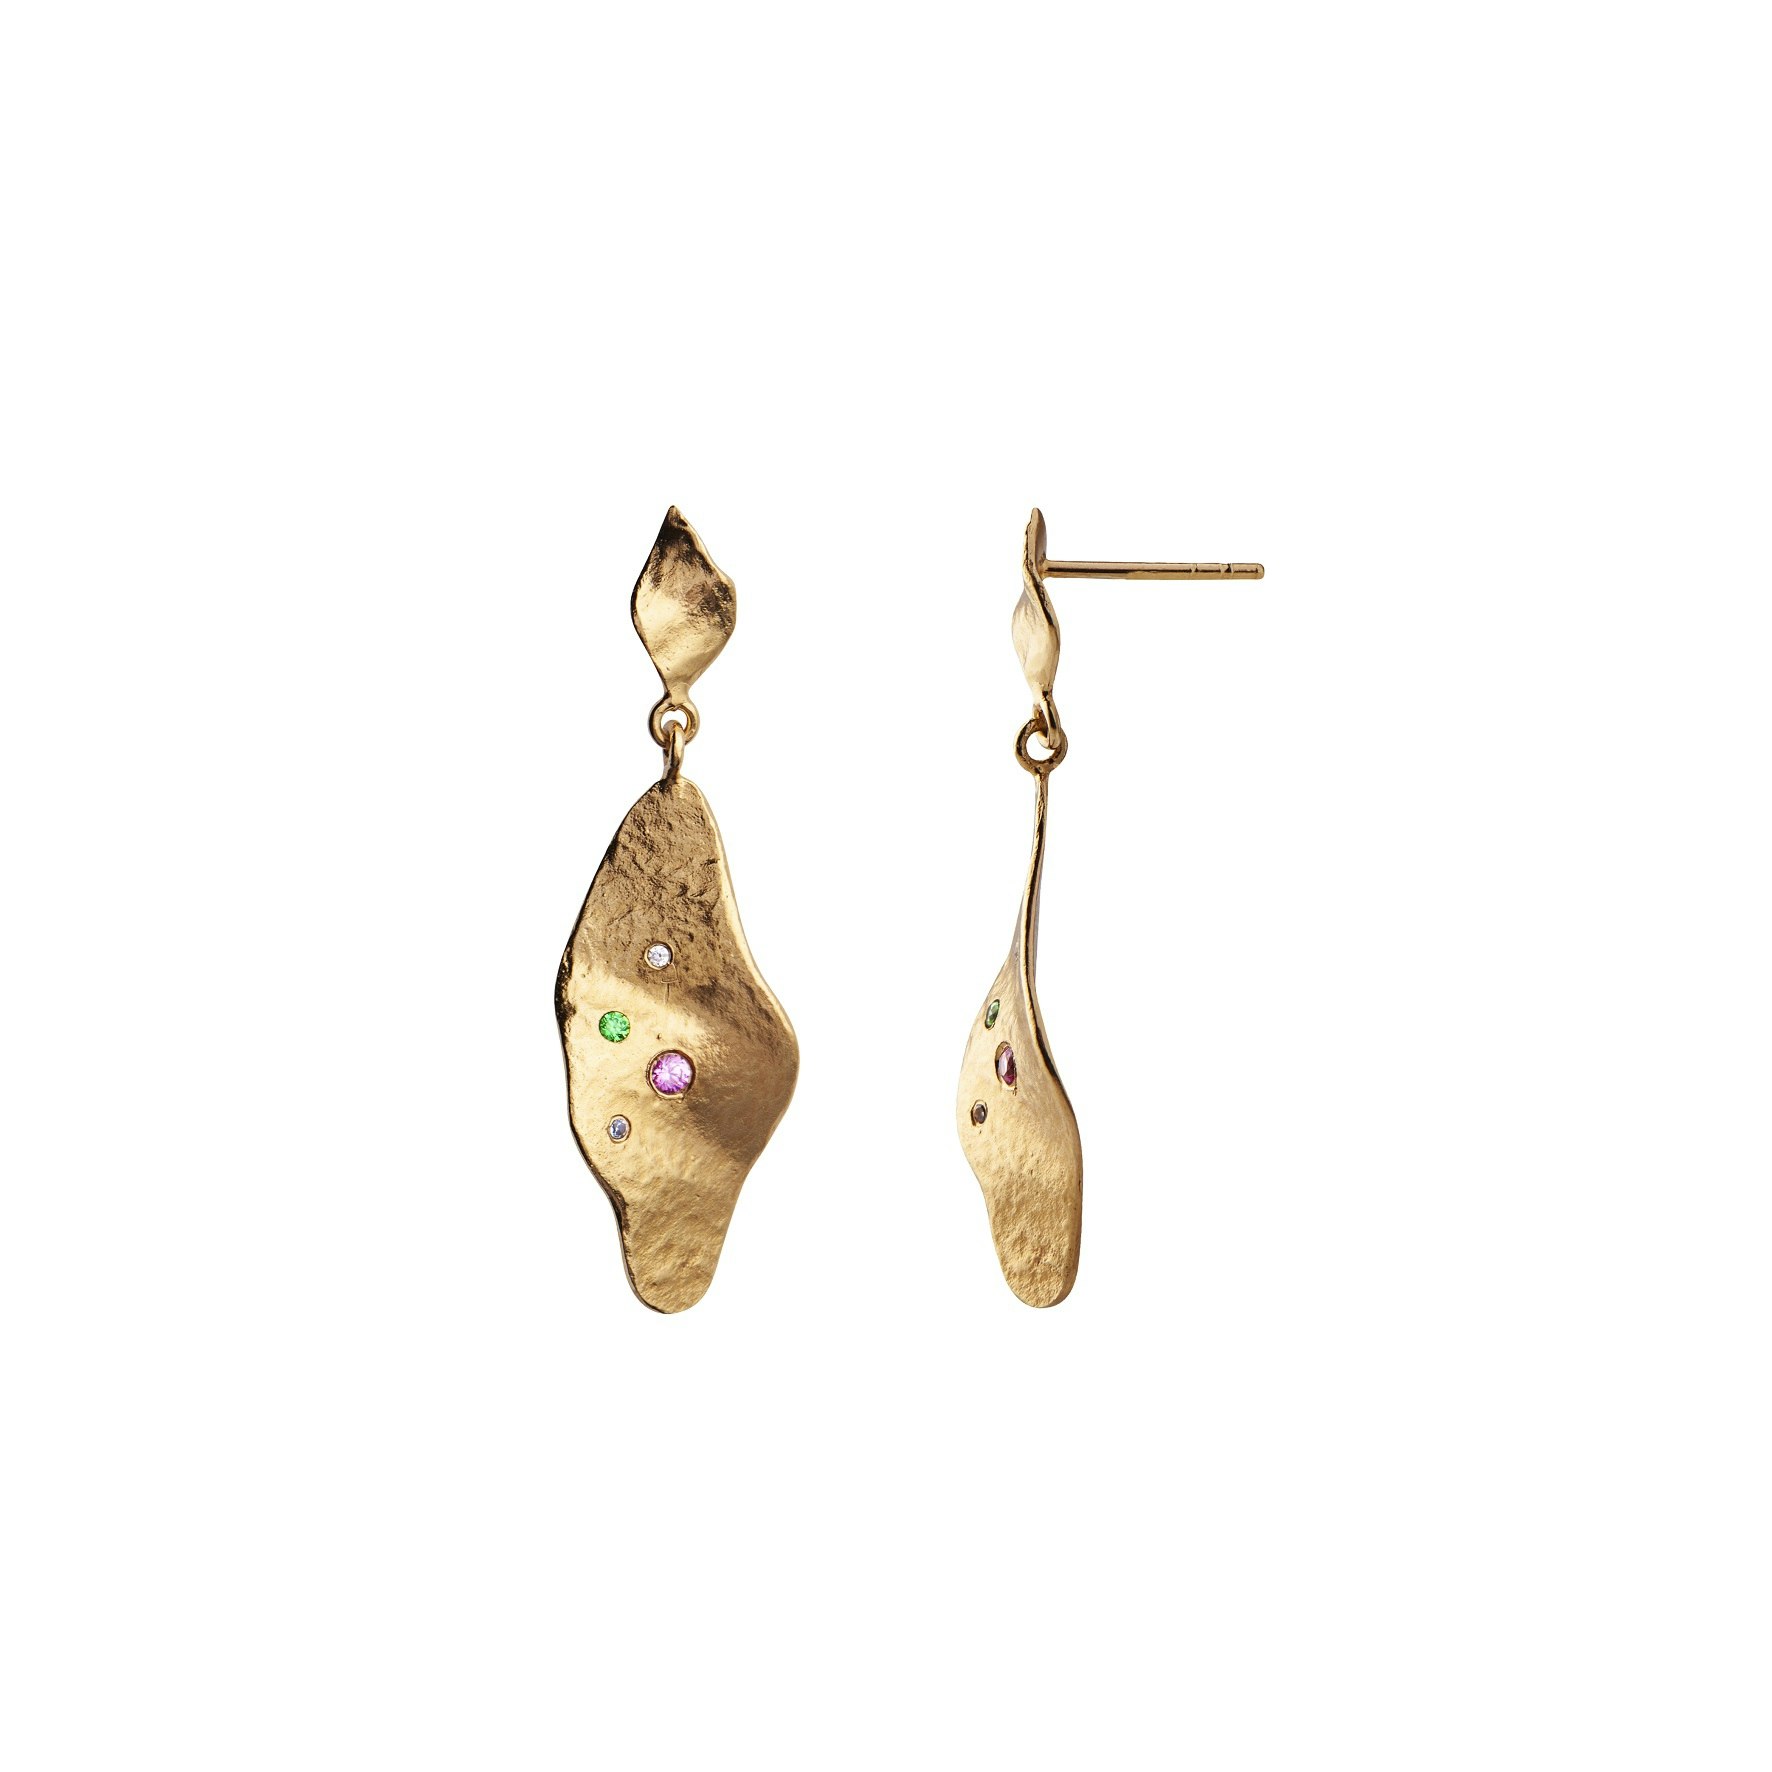 Dangling Ile De L'Amour Earring With Stones von STINE A Jewelry in Vergoldet-Silber Sterling 925